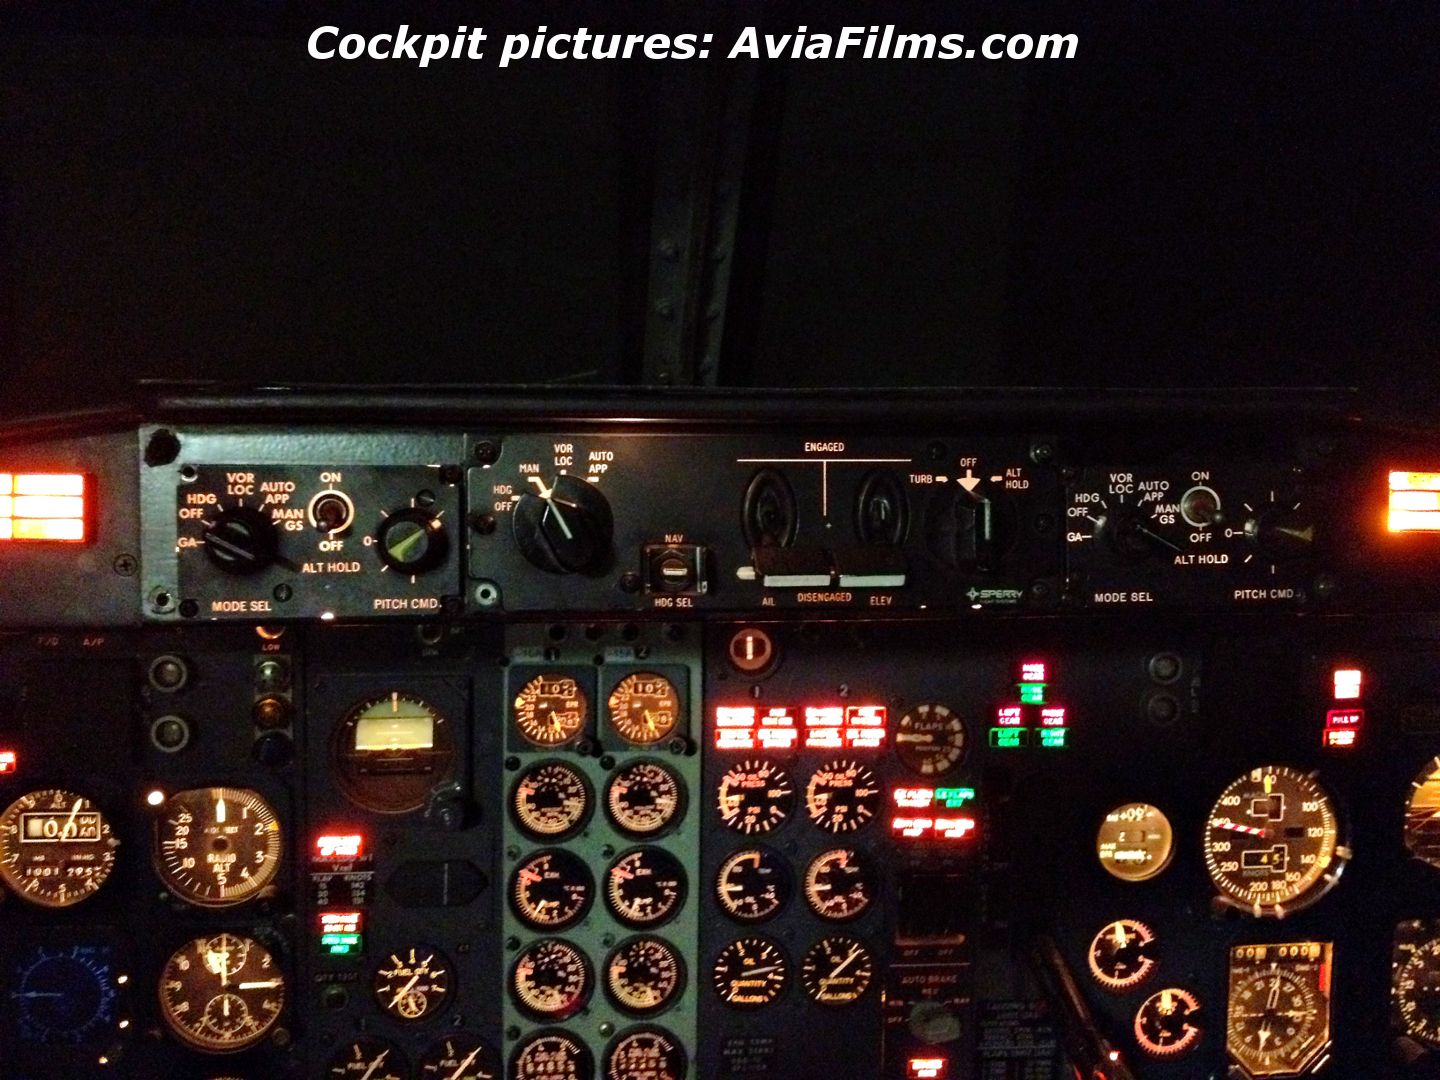 Airplane pictures: cockpit photos, airplane models & airlines